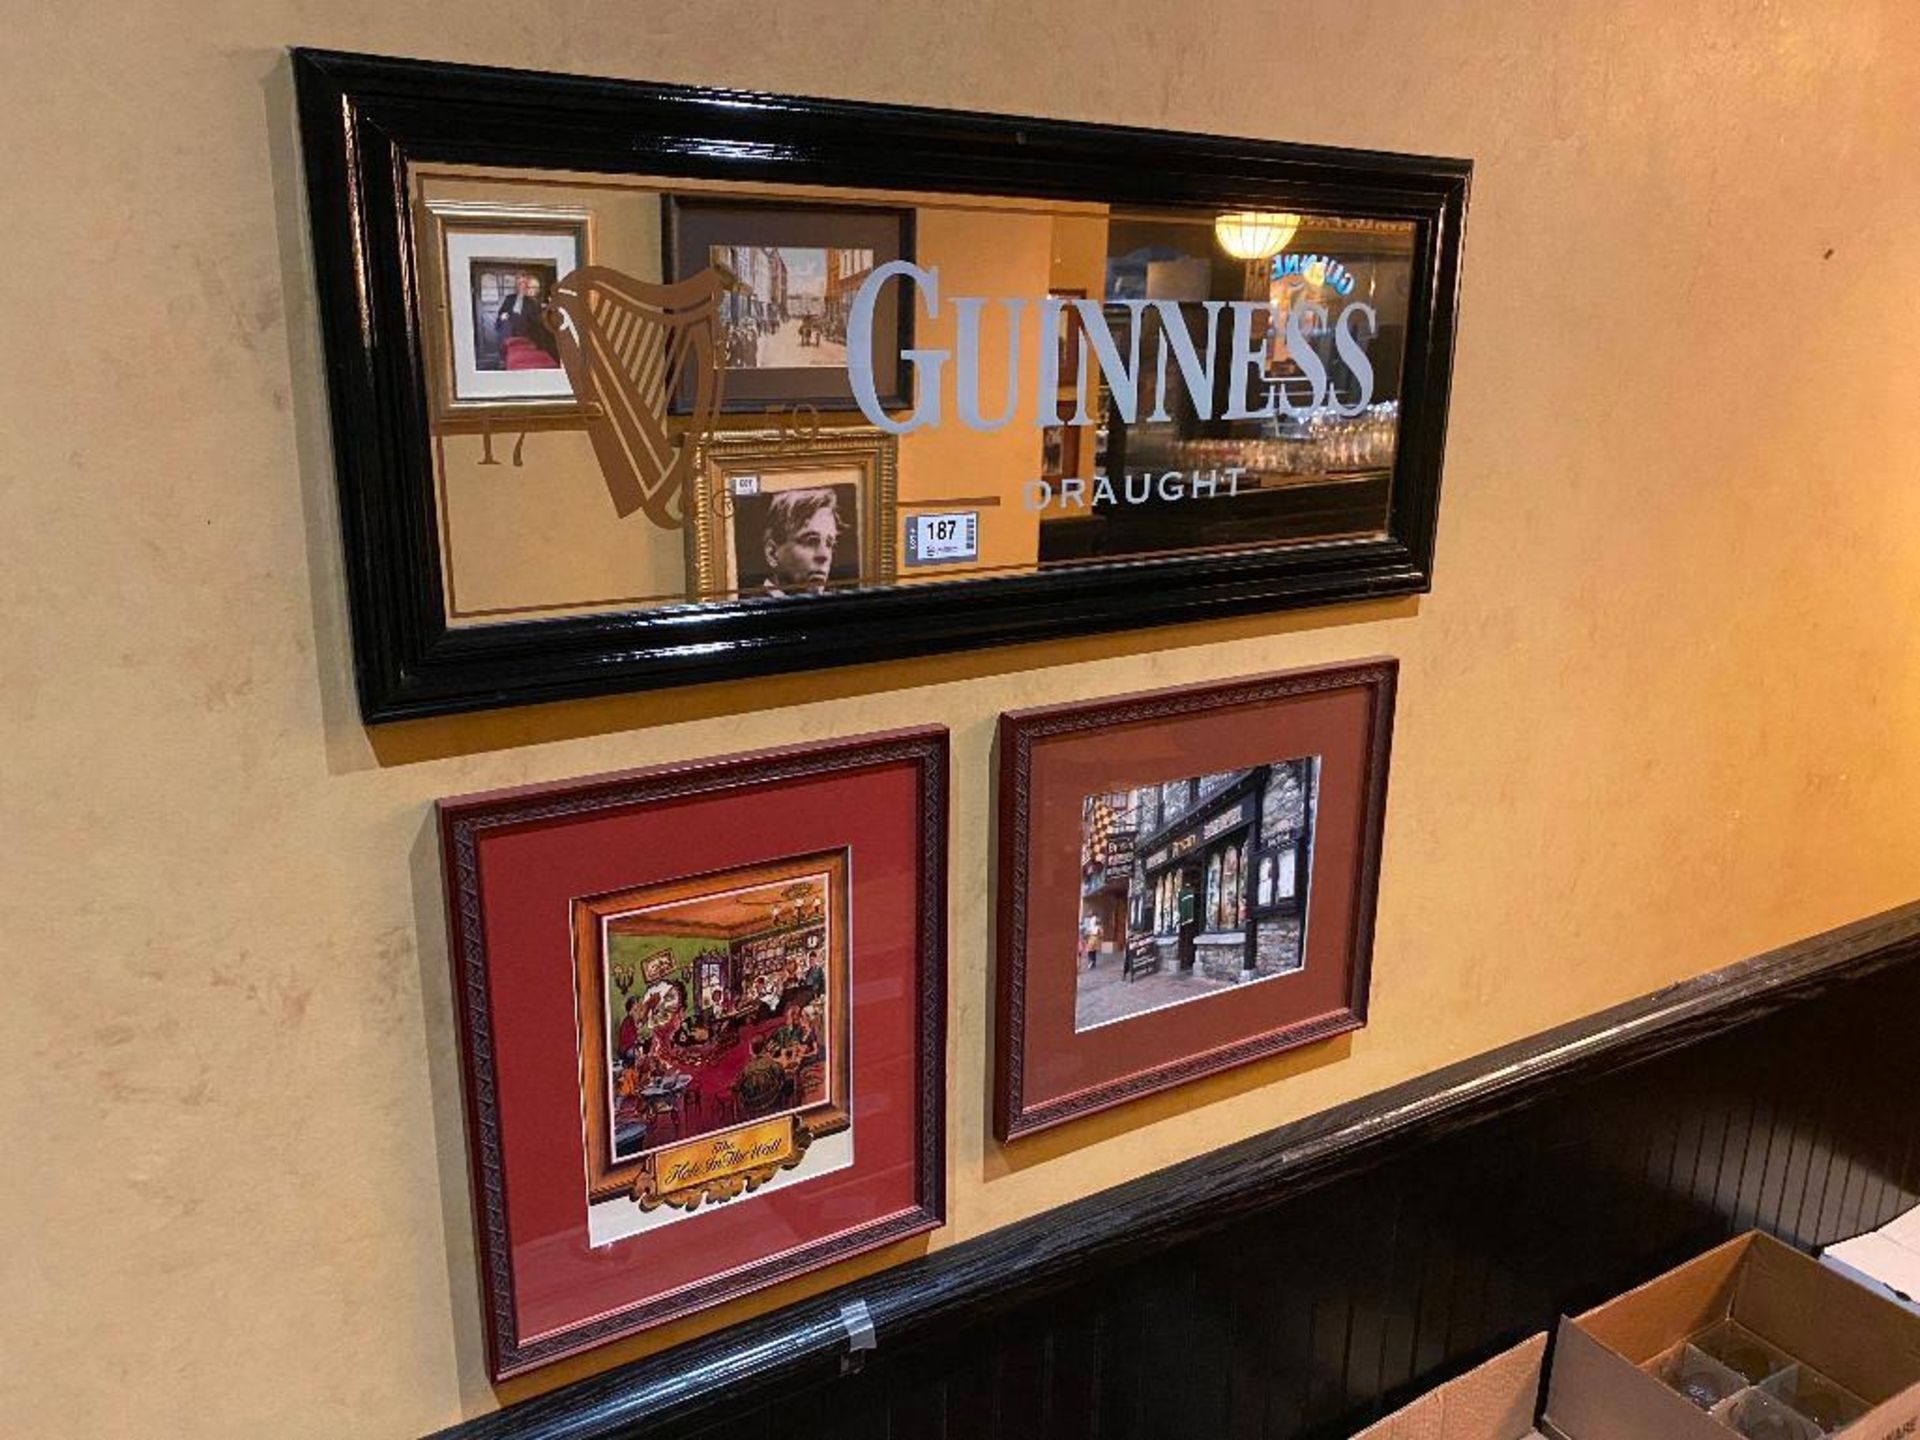 LOT OF (3) FRAMED MEMORABILIA PHOTOS & (1) GUINNESS MIRROR - NOTE: REQUIRES REMOVAL FROM WALL, PLEAS